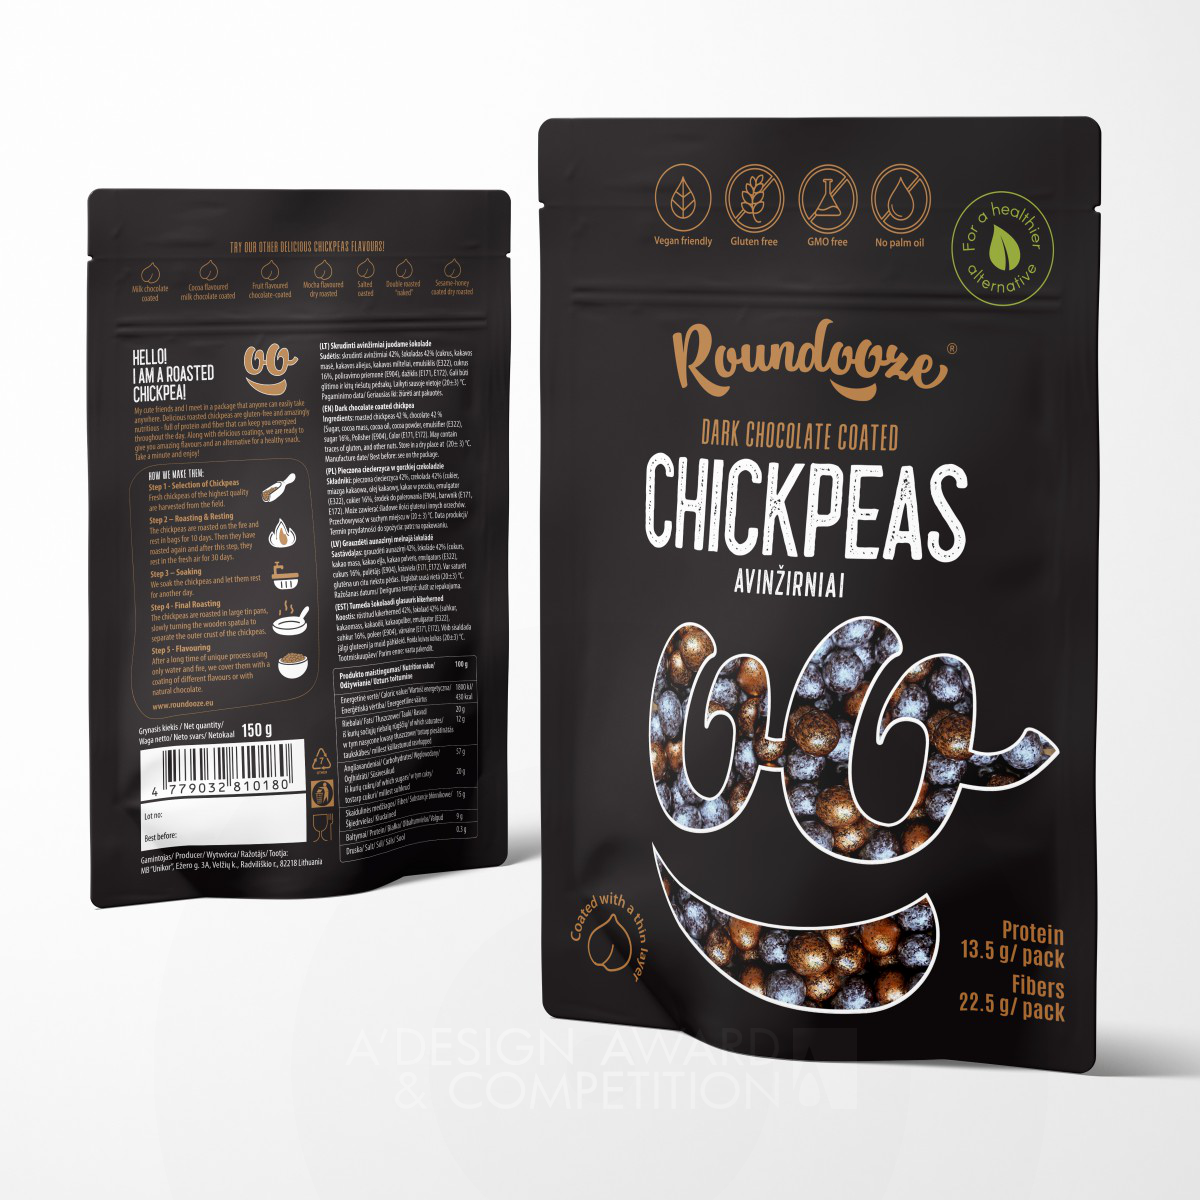 Roundooze Chickpea Snack <b>Packaging